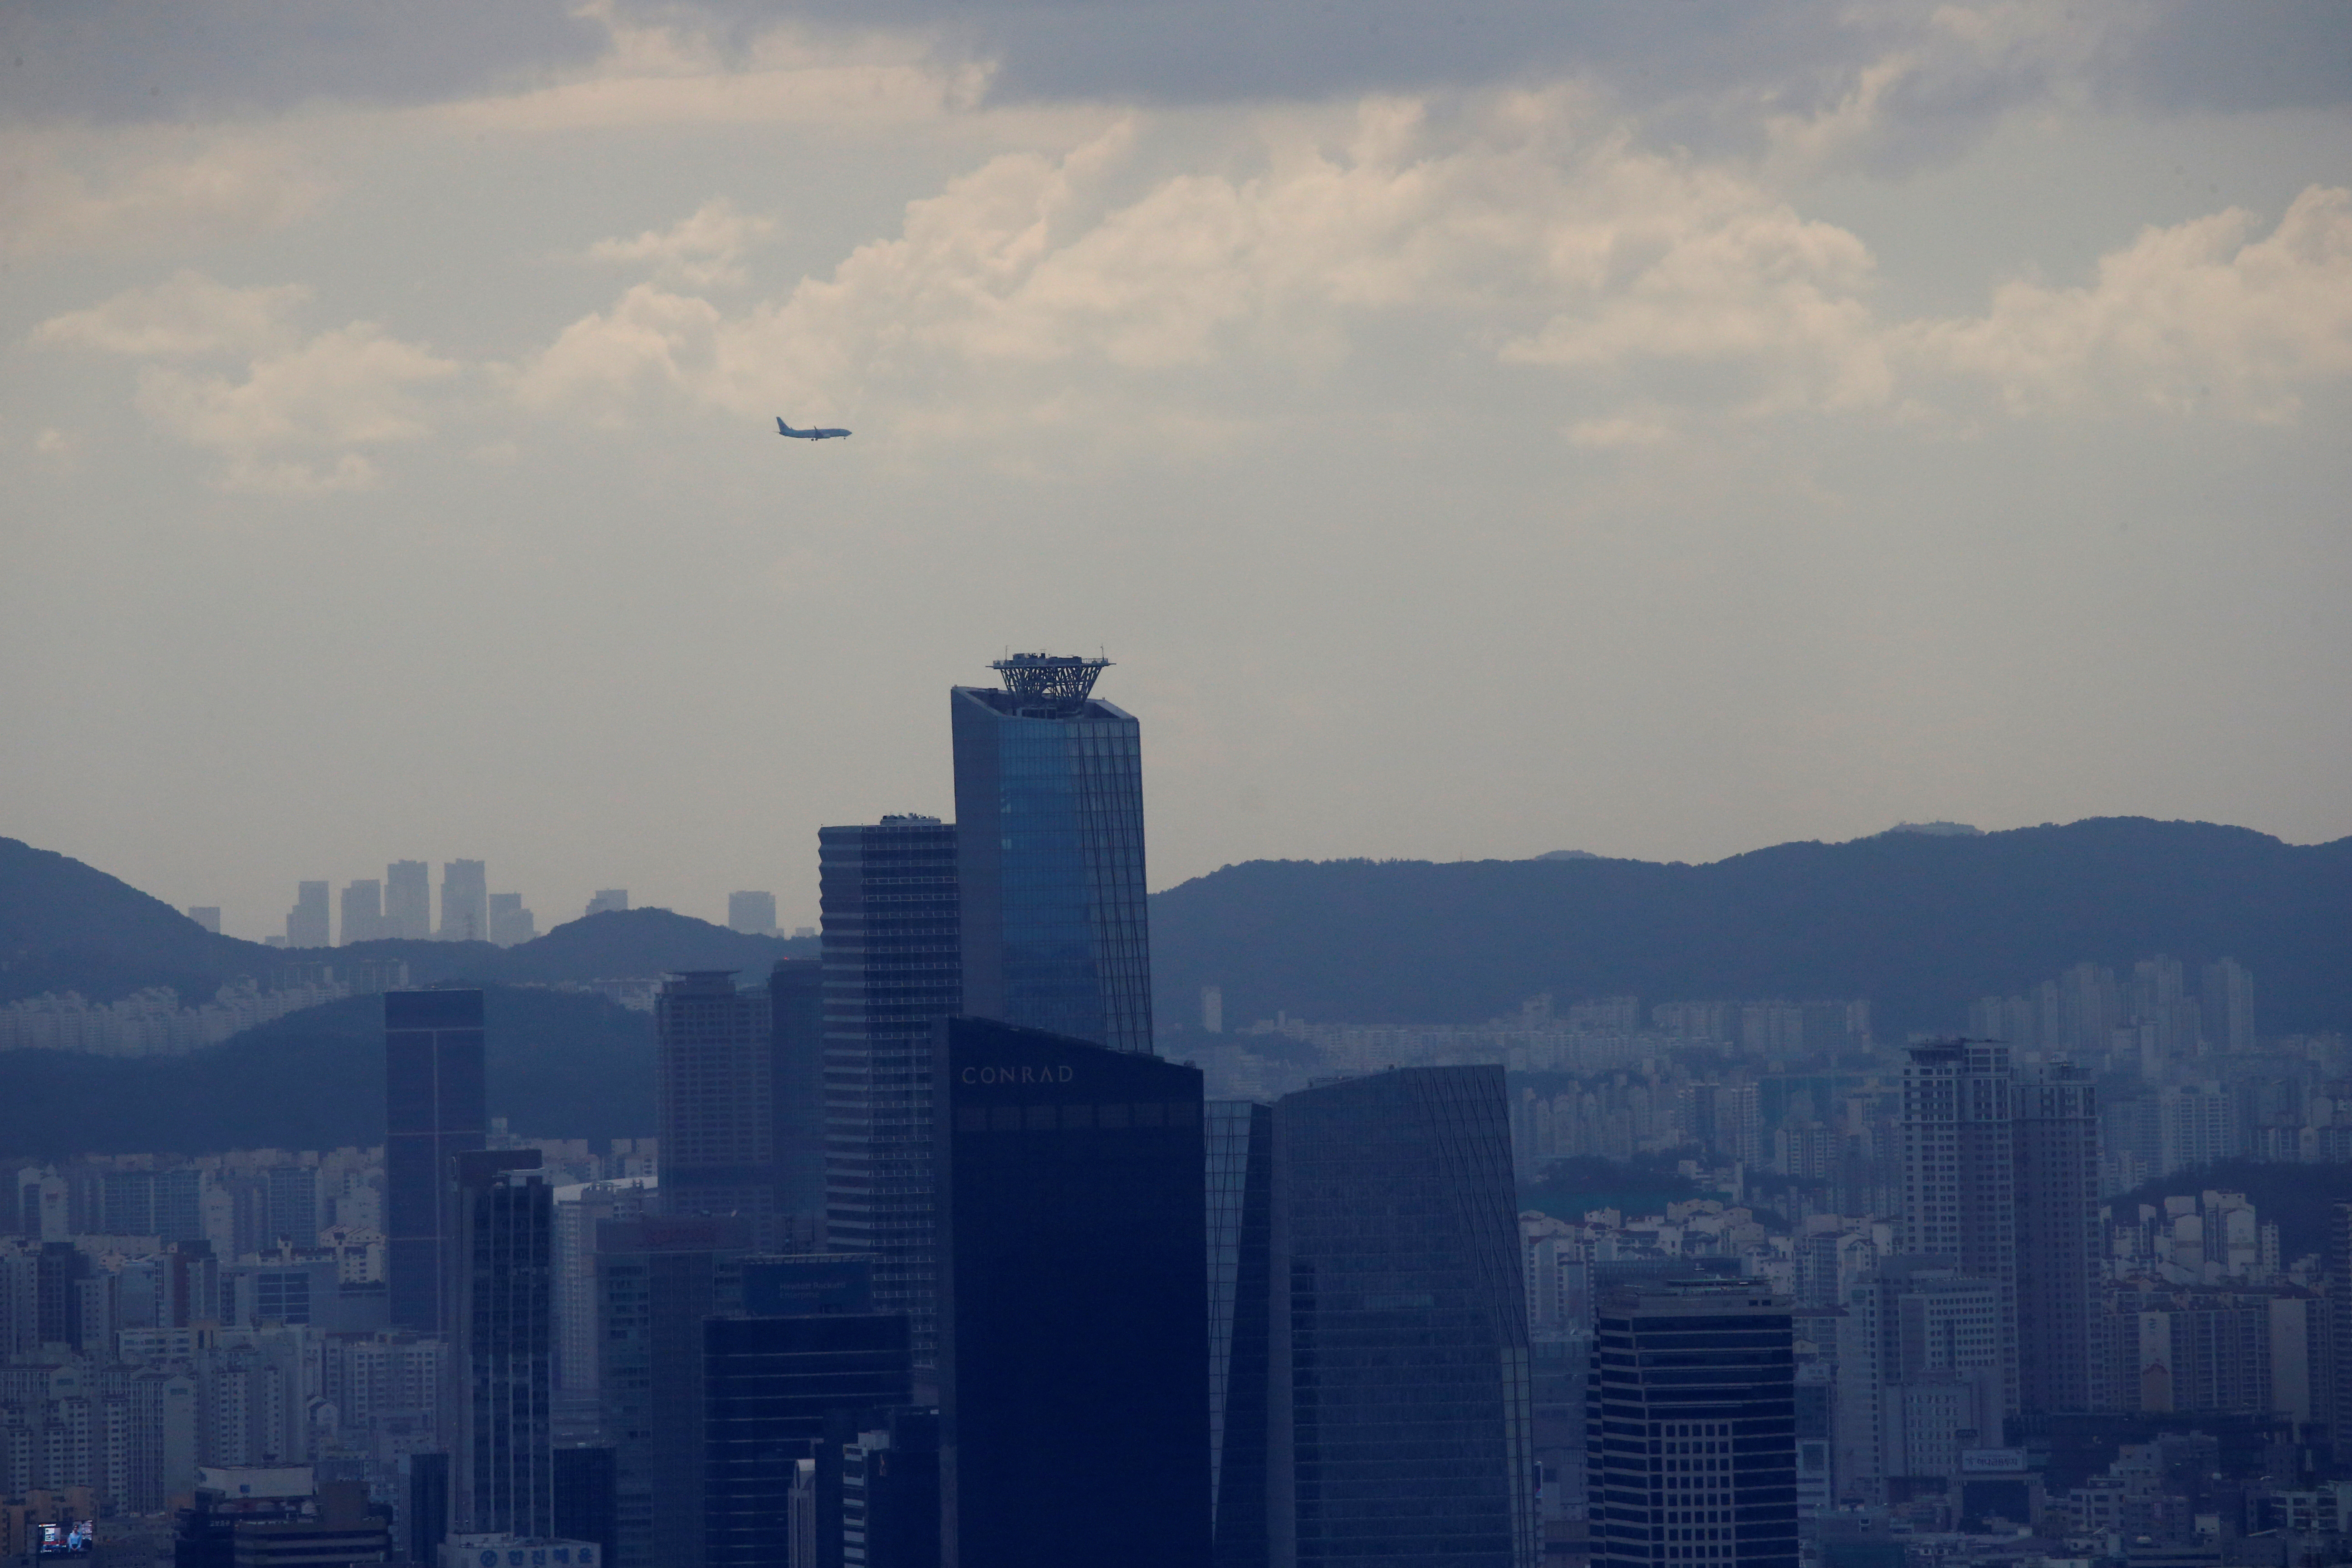 A plane flies over commercial buildings in Seoul